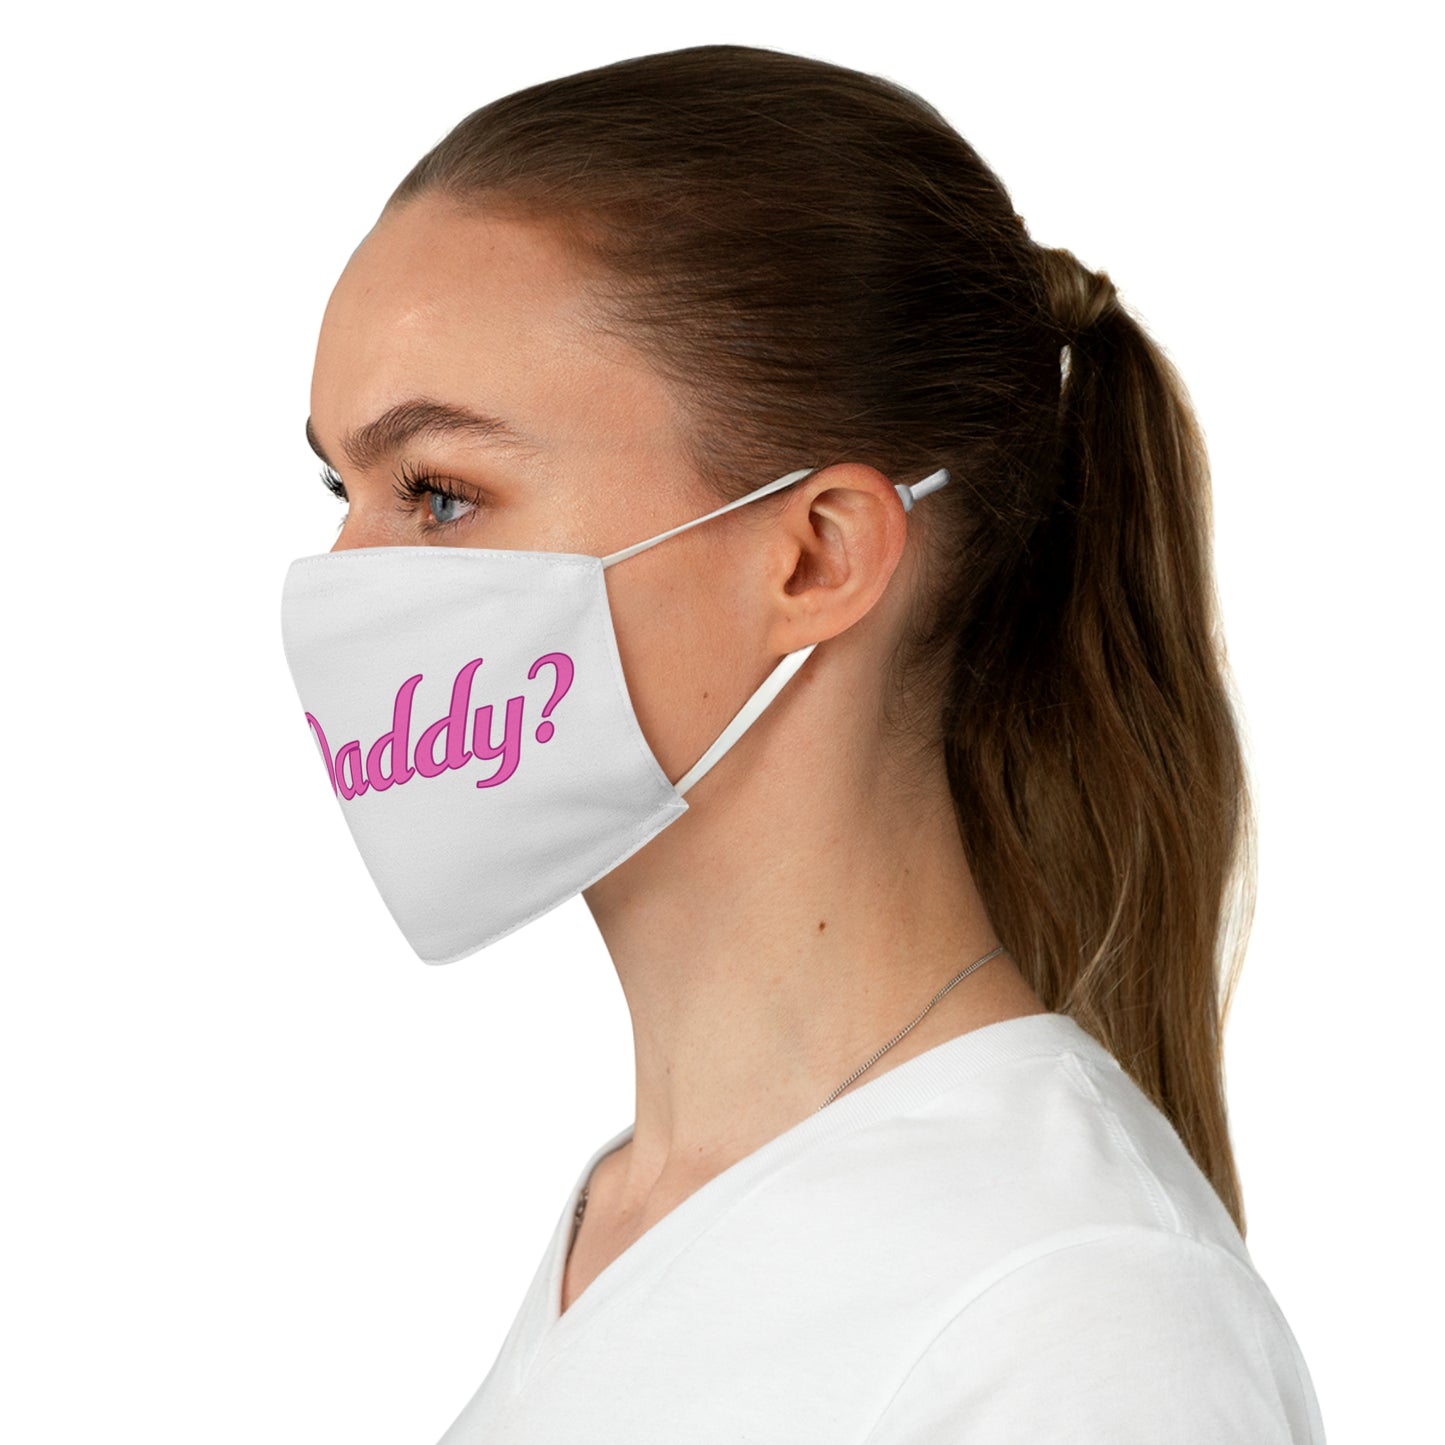 Yes, Daddy? Fabric Face Mask |